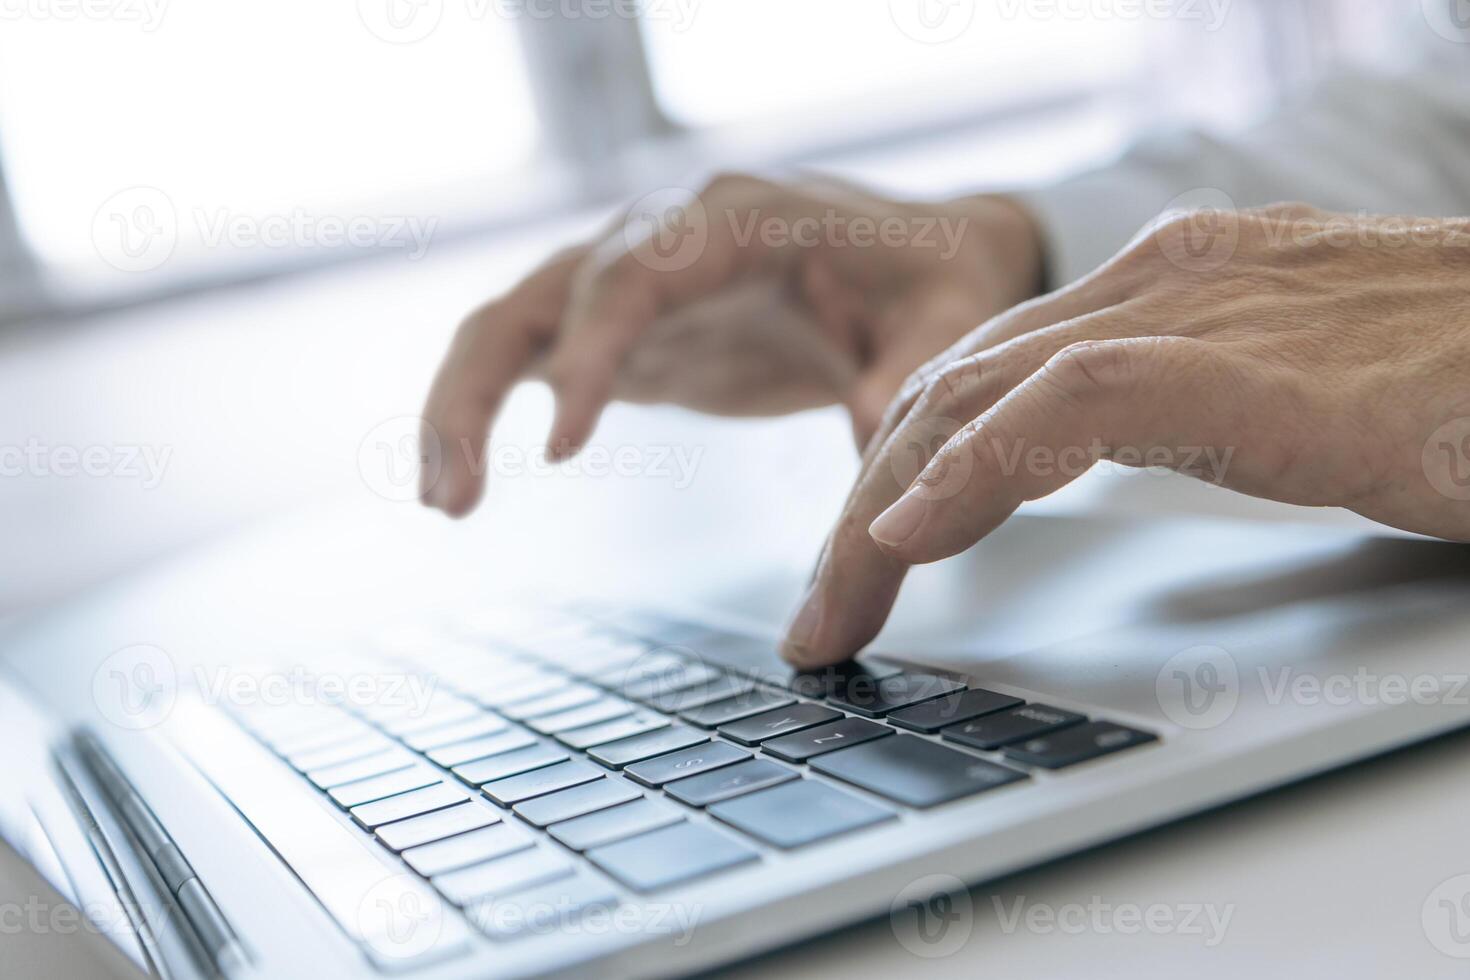 Typing on a laptop computer keyboard as data input photo